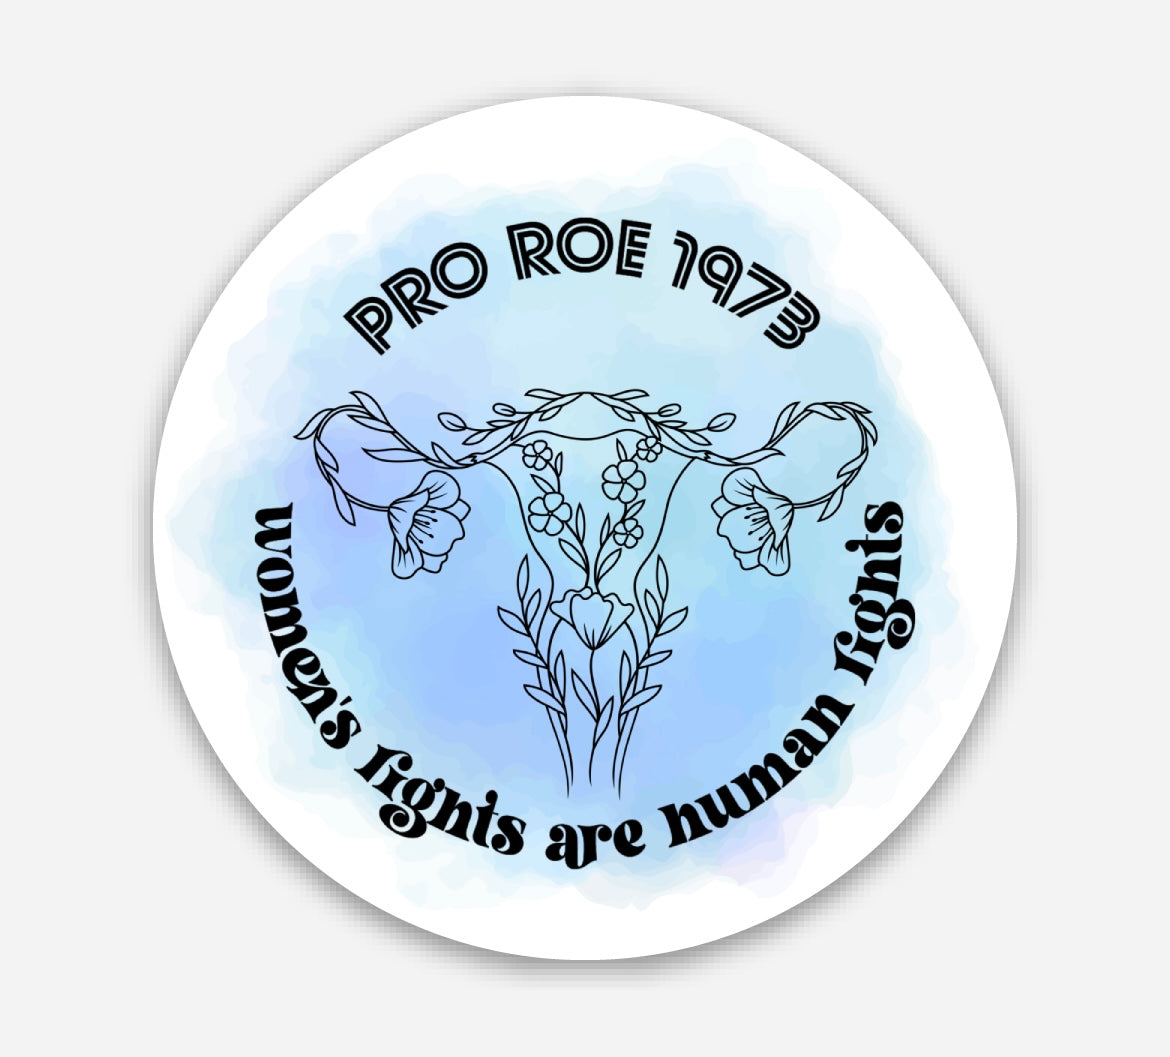 Pro Roe 1973 women's rights are human rights sticker